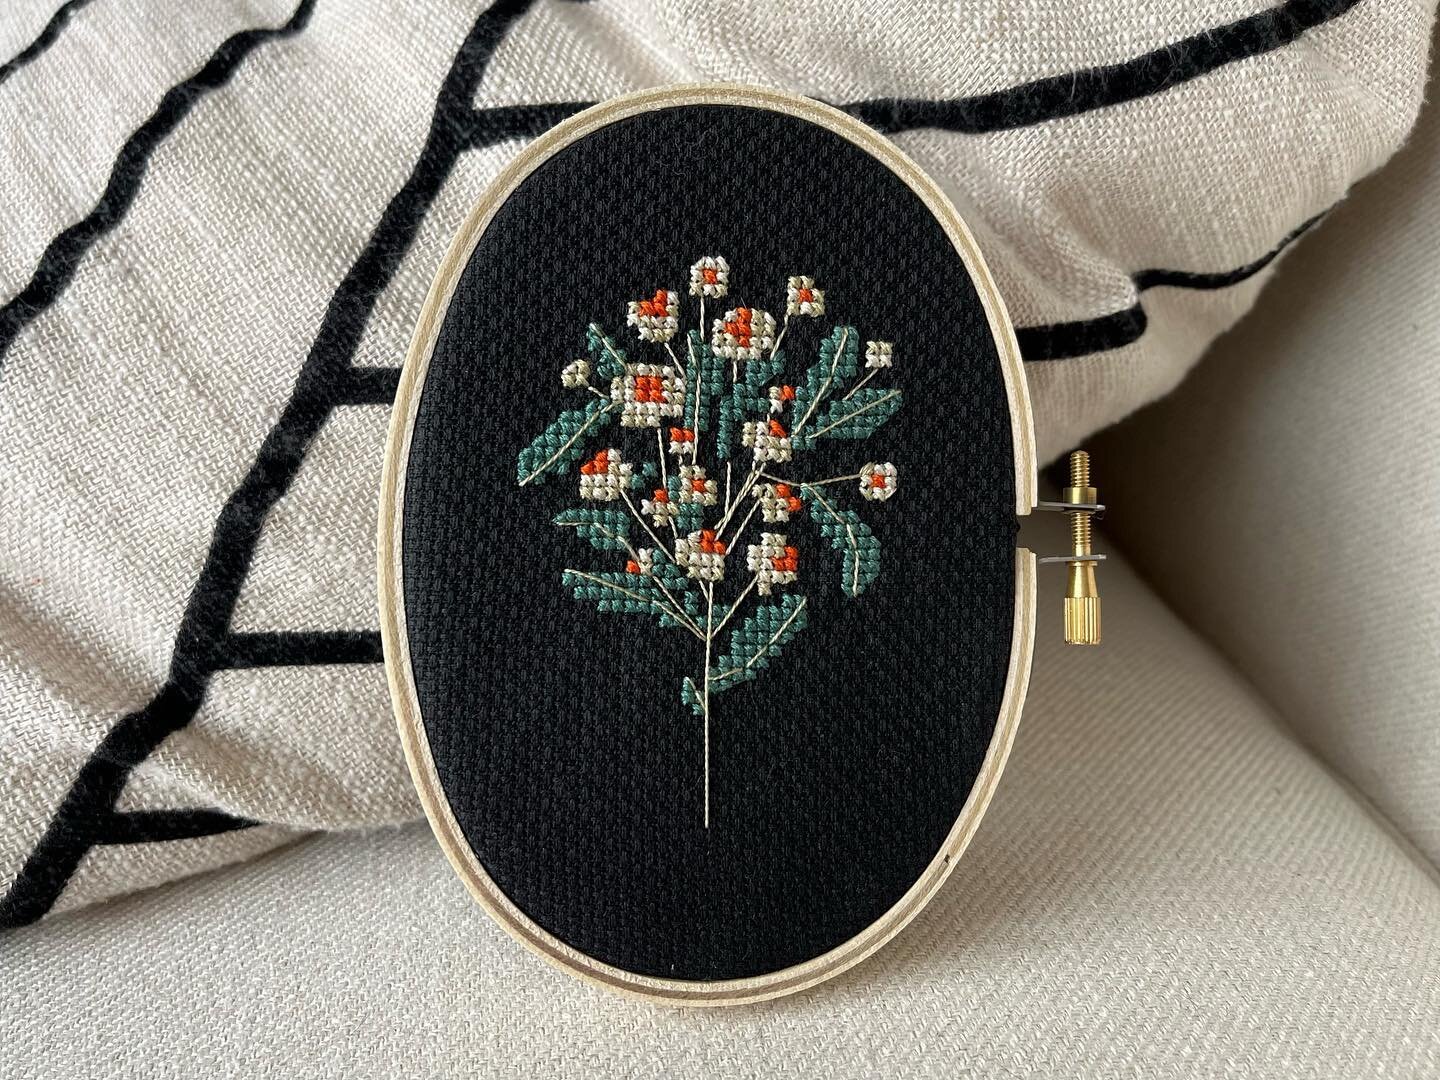 Continuing the flower series and loveeee the dark background! 3&rdquo;x5&rdquo; in wood embroidery hoop
-
Find the pattern @junebuganddarlin